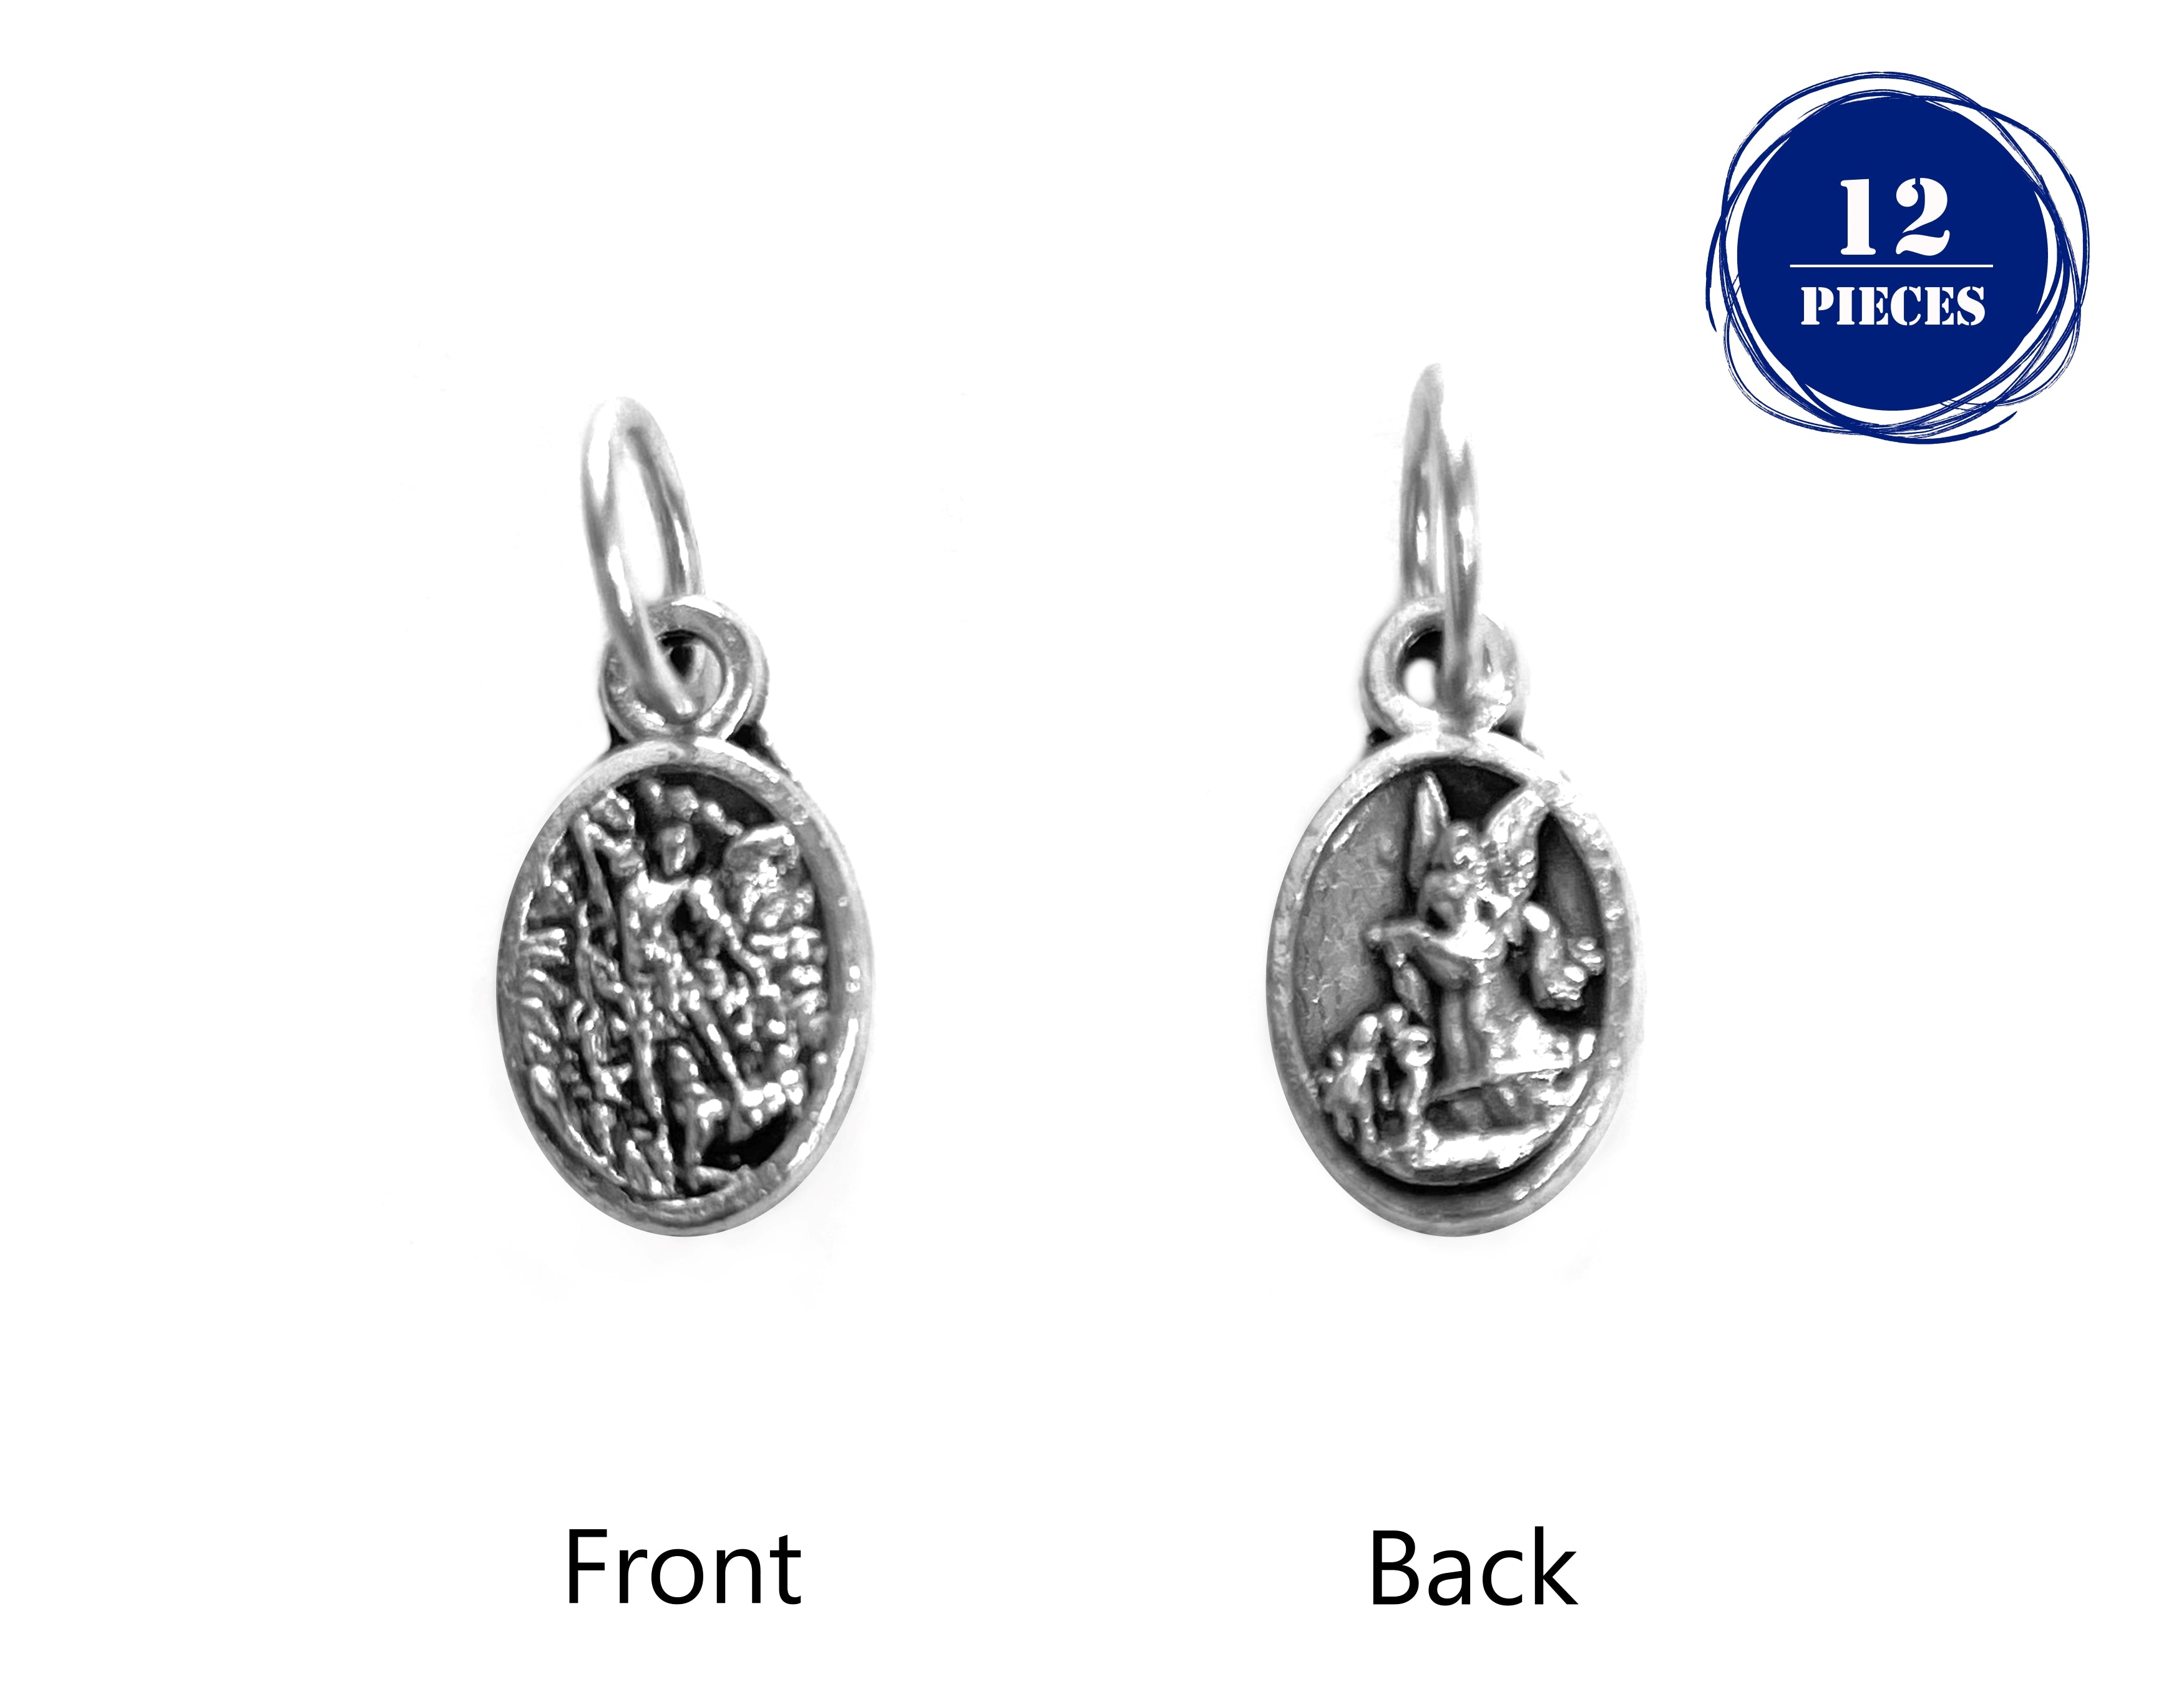 Saints tiny medals in oxidized silver made in Italy 0.5" x 0.3"